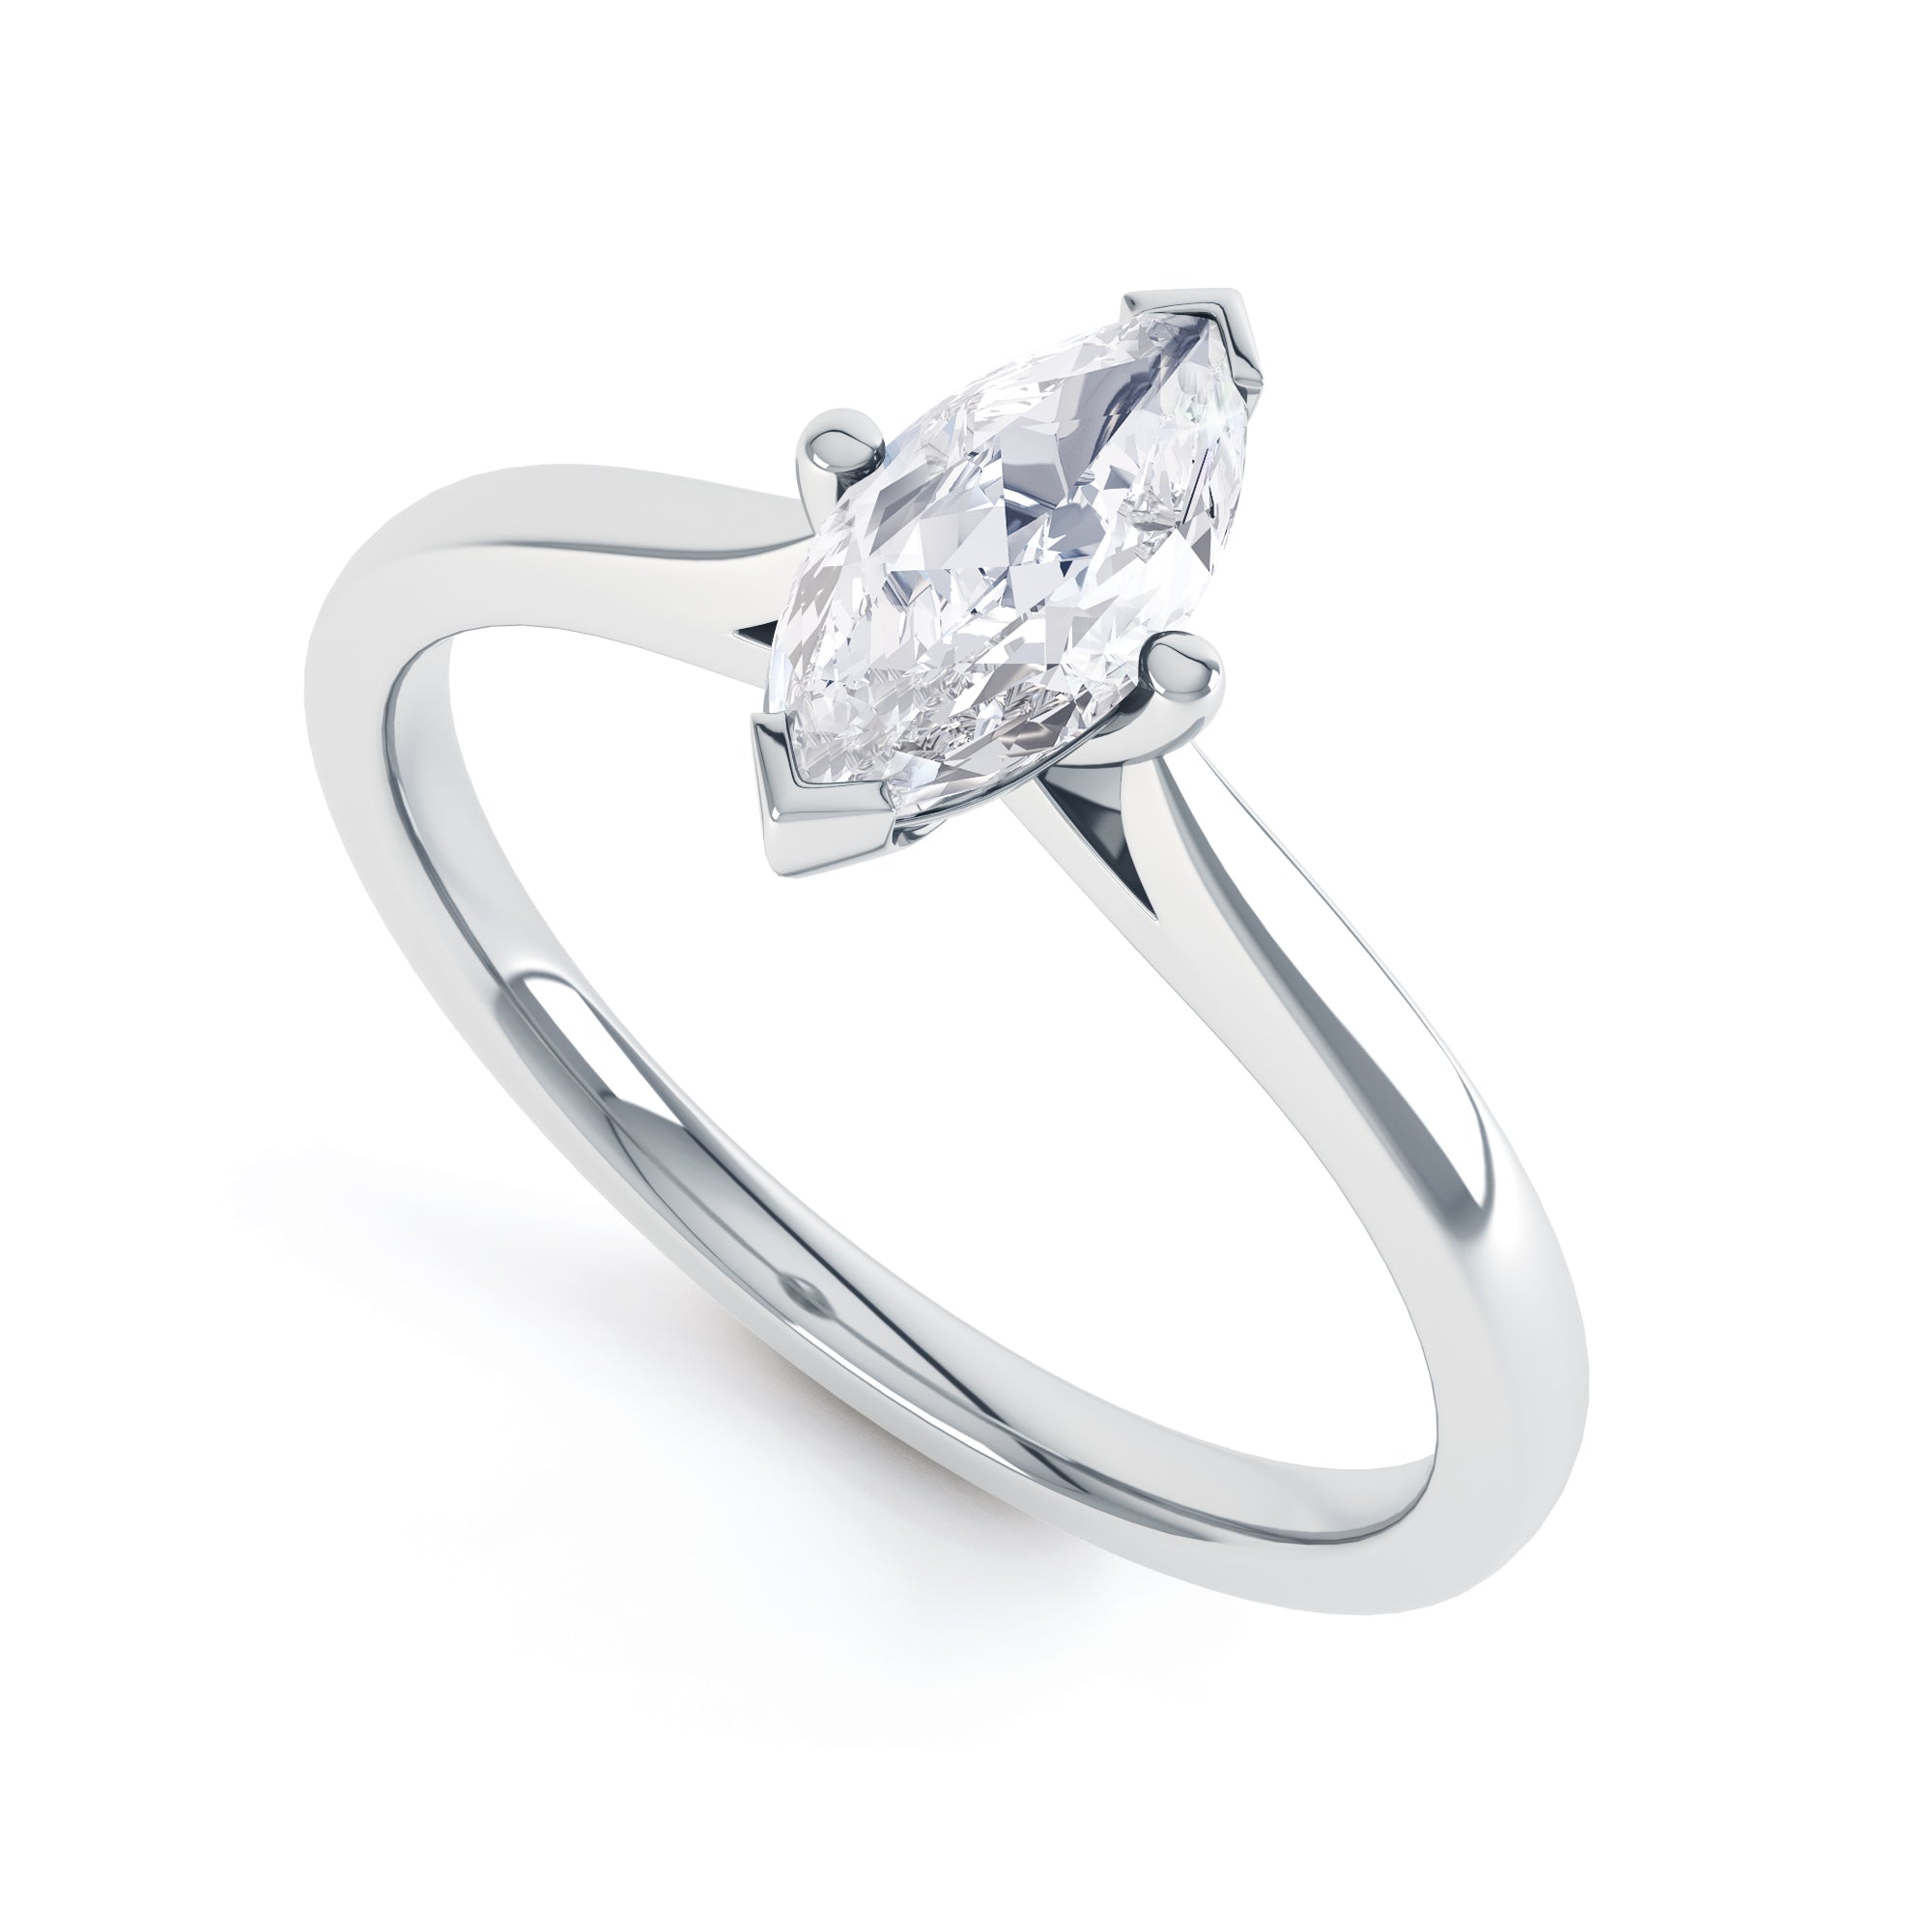 Marquise-Cut Centre Stone, V claws, Diamond Engagement Ring with Knife Edge Shoulders with cathedral setting